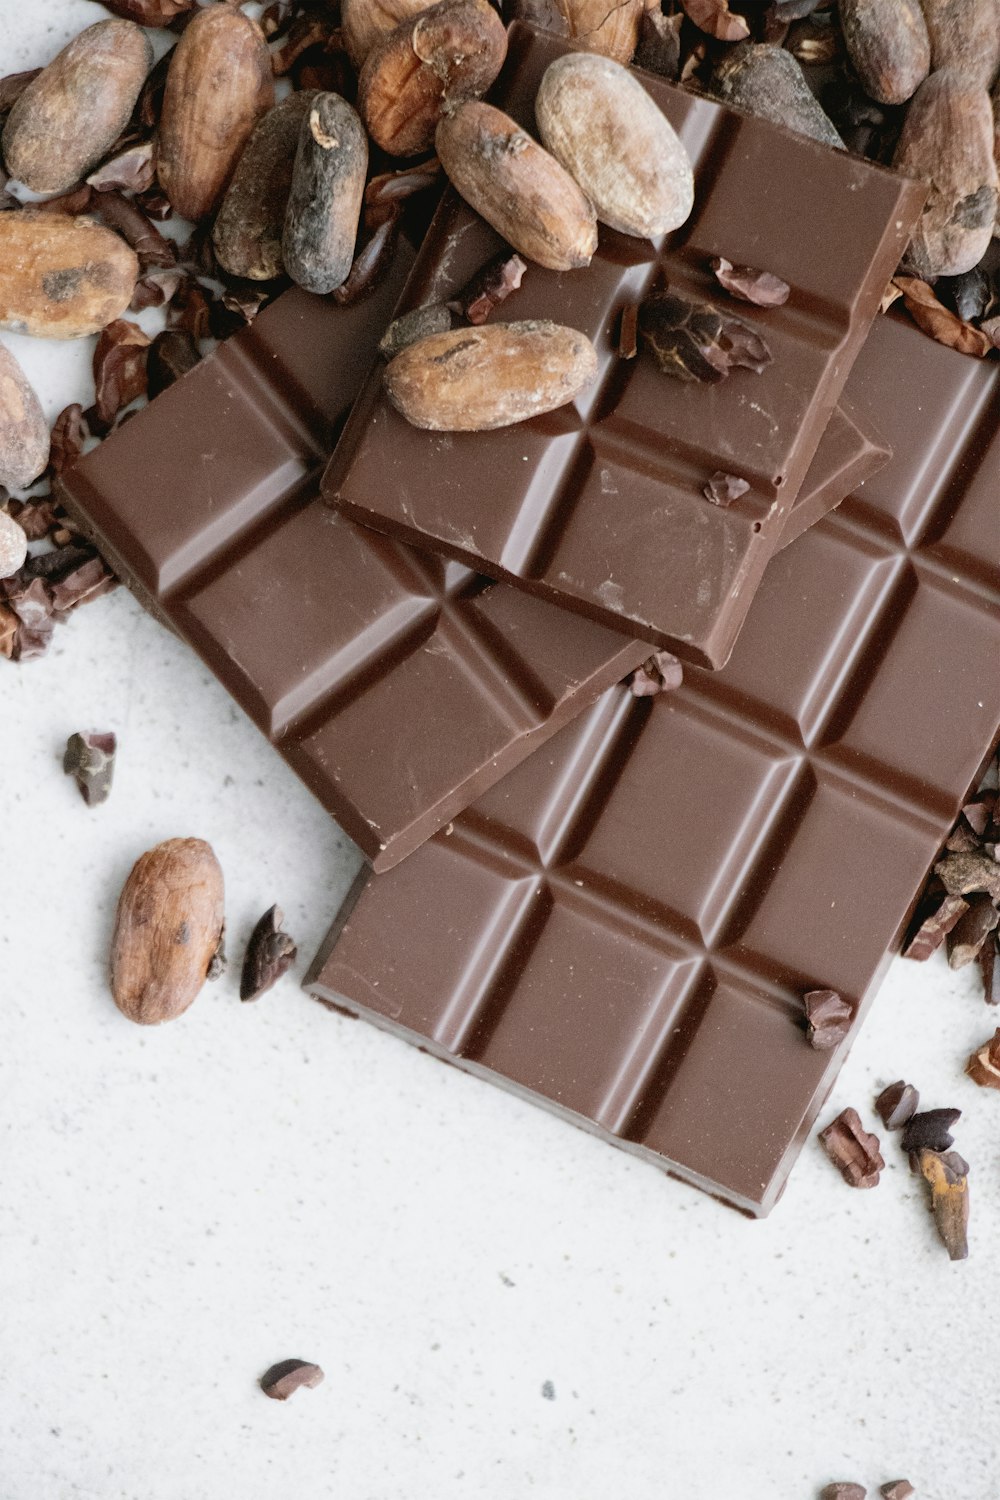 Best 100+Chocolate Images | Download Free Pictures On Unsplash